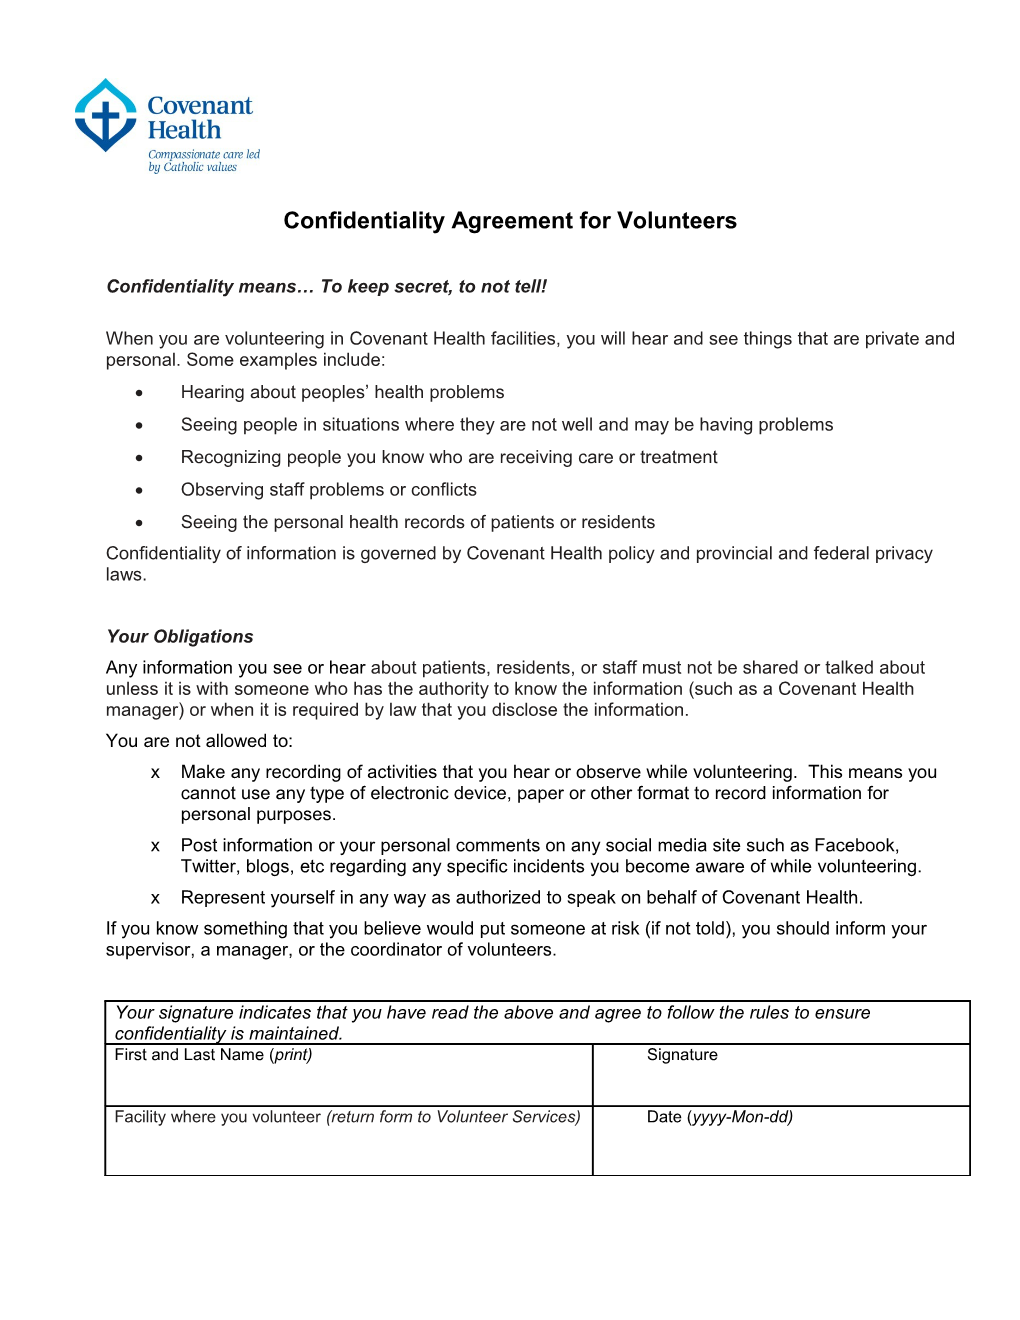 Confidentiality Agreement for Volunteers